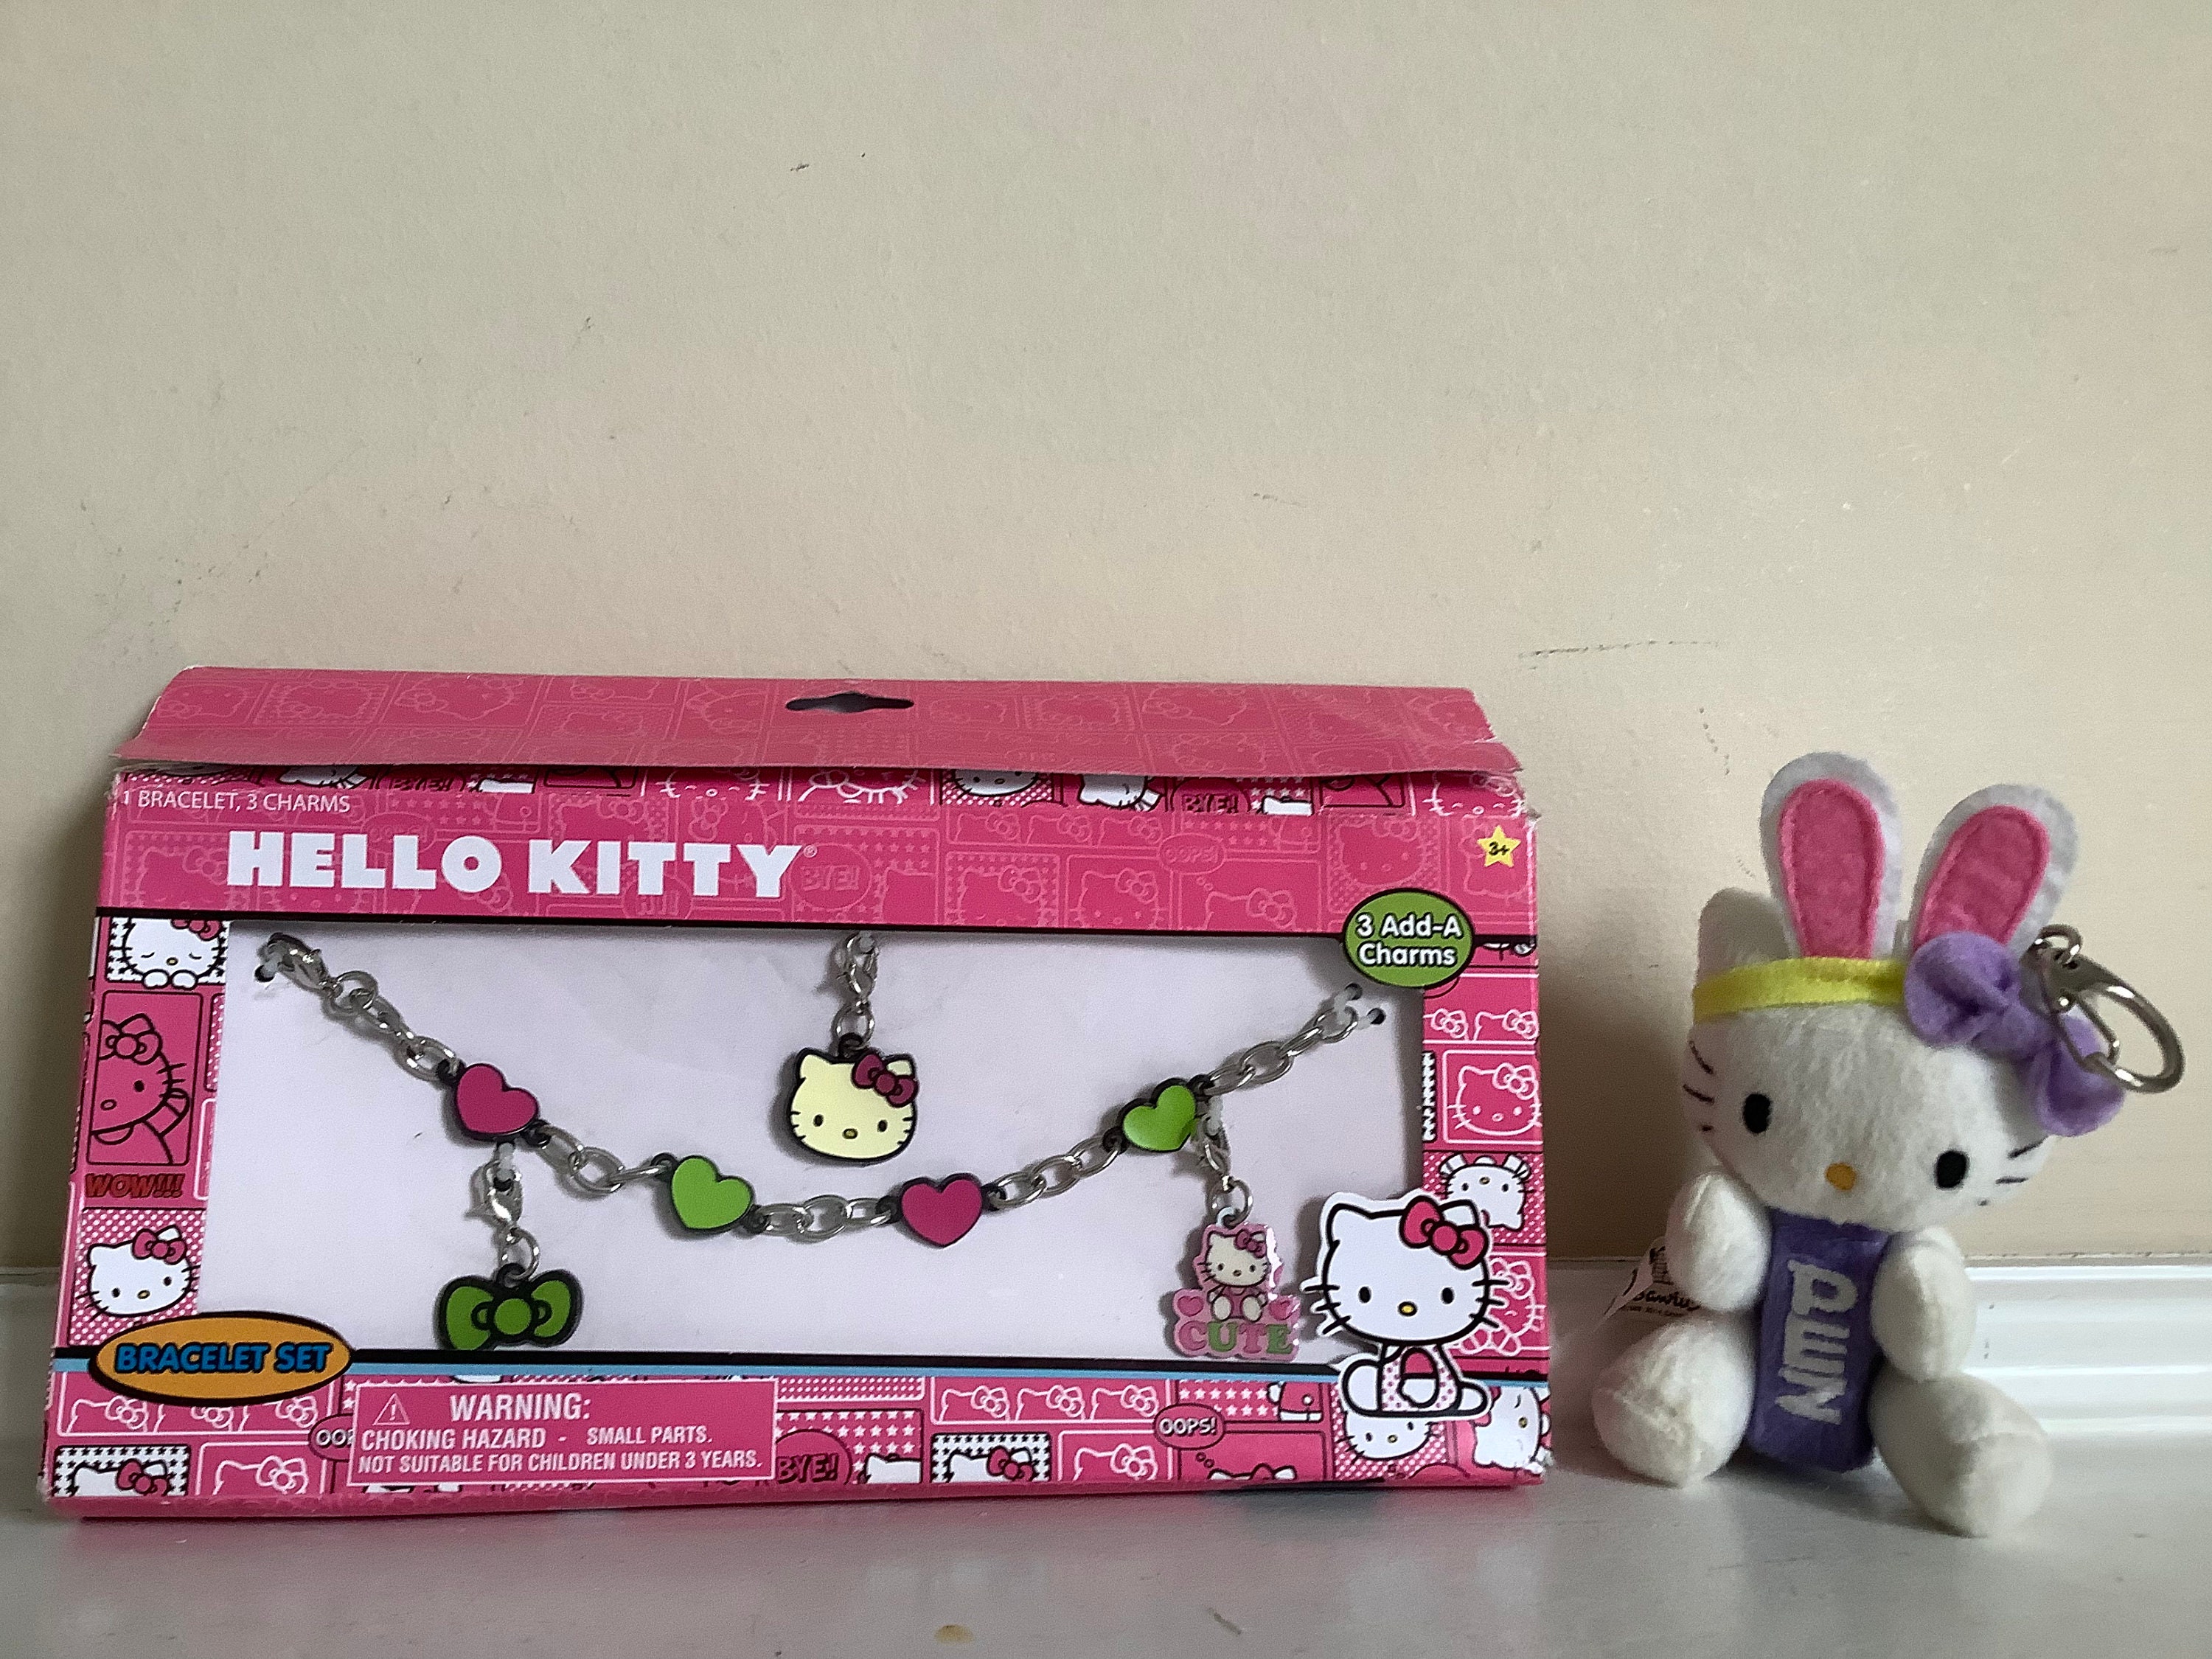 Sanrio Hello Kitty 3 Charms with Blue and Purple Hearts Charm Bracelet Set  NEW